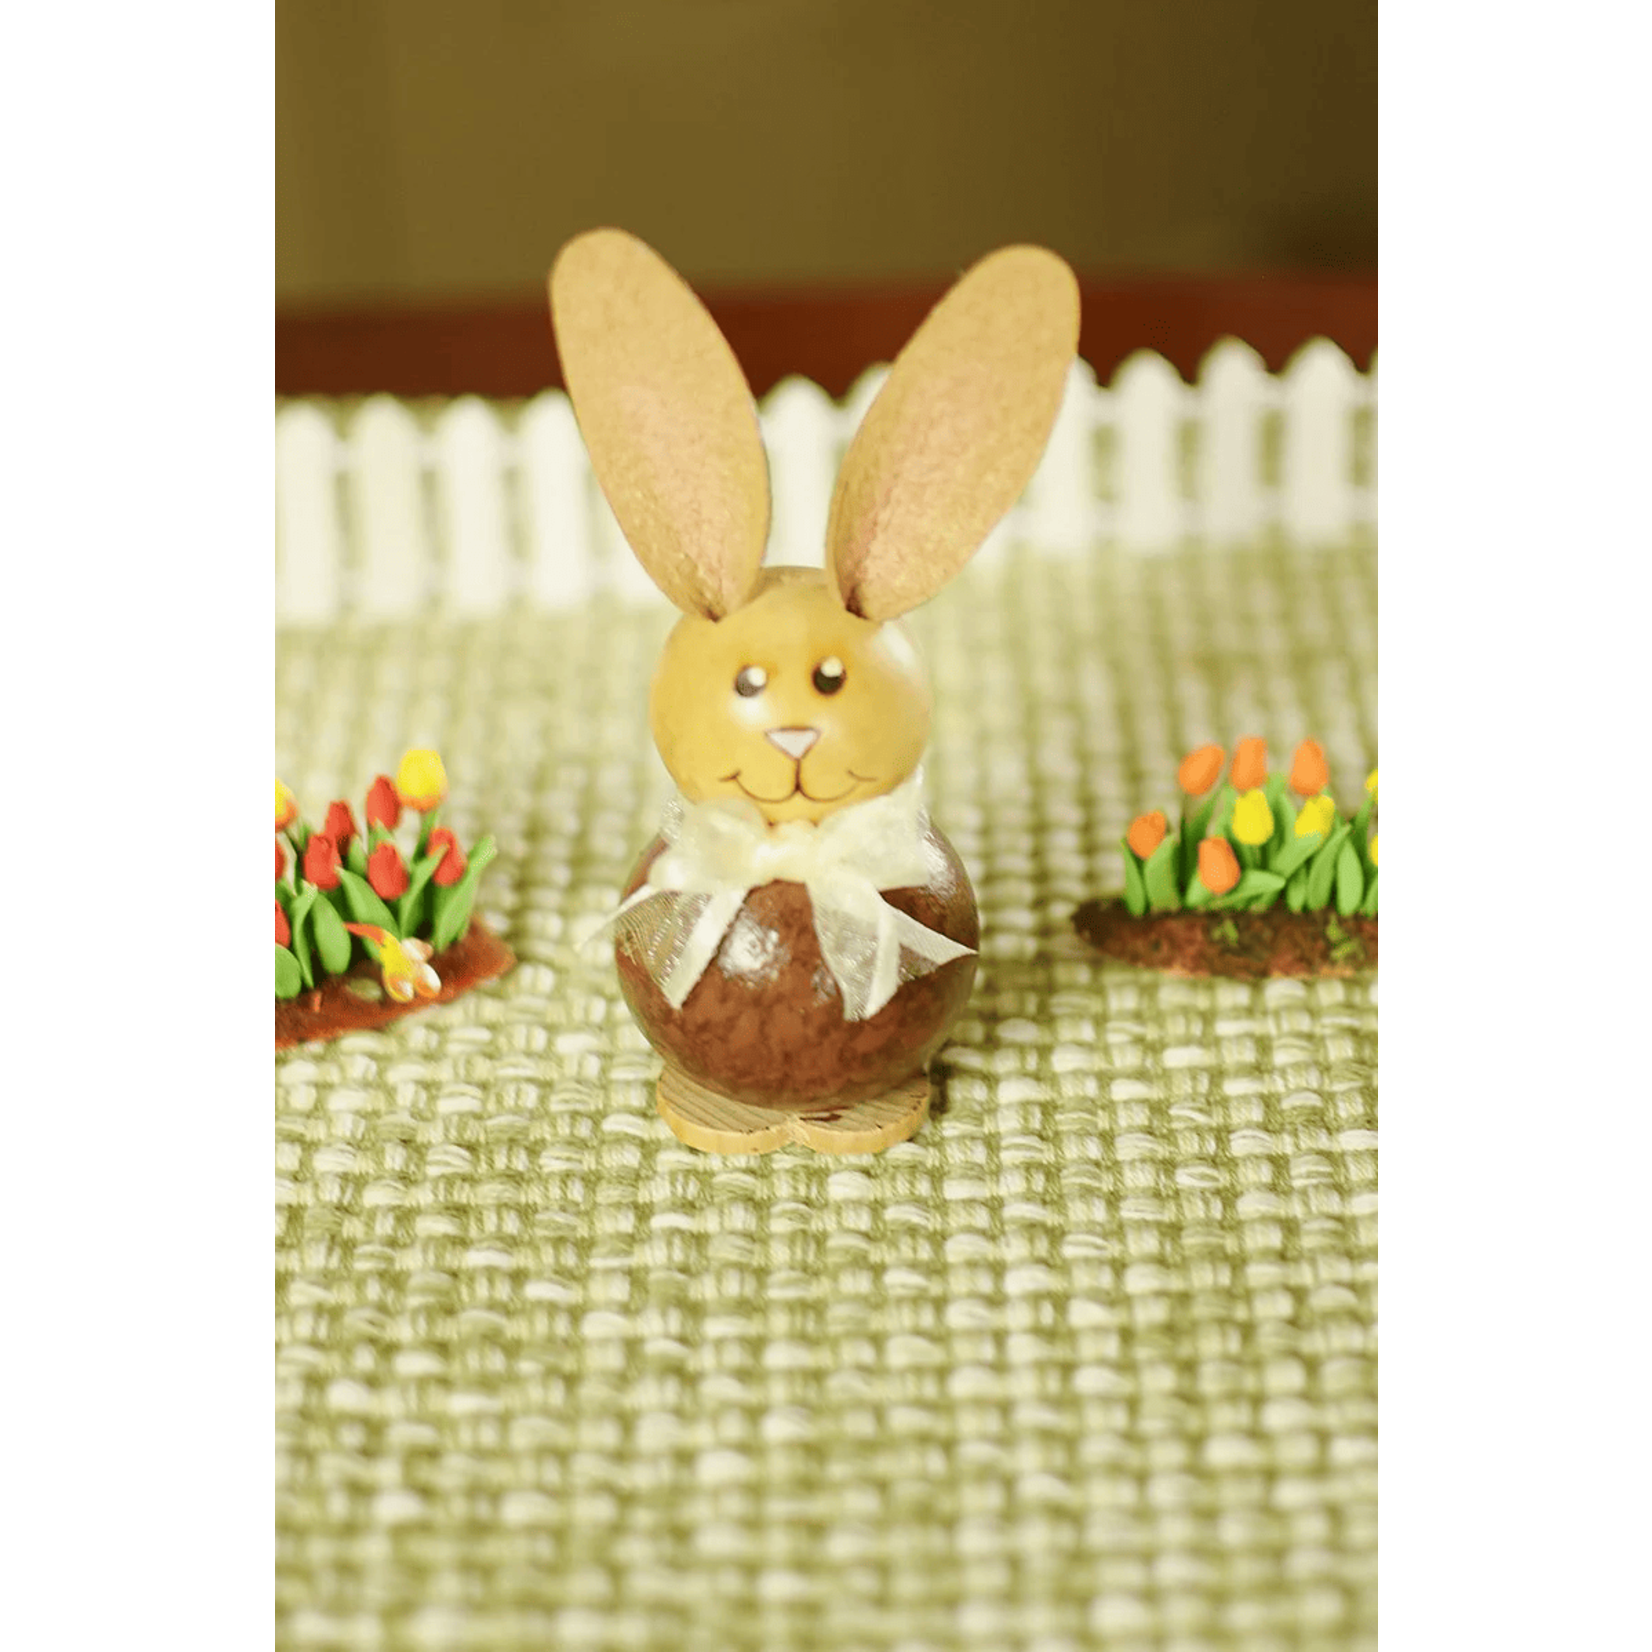 Lil Chester Short Bunny Handcrafted Gourd